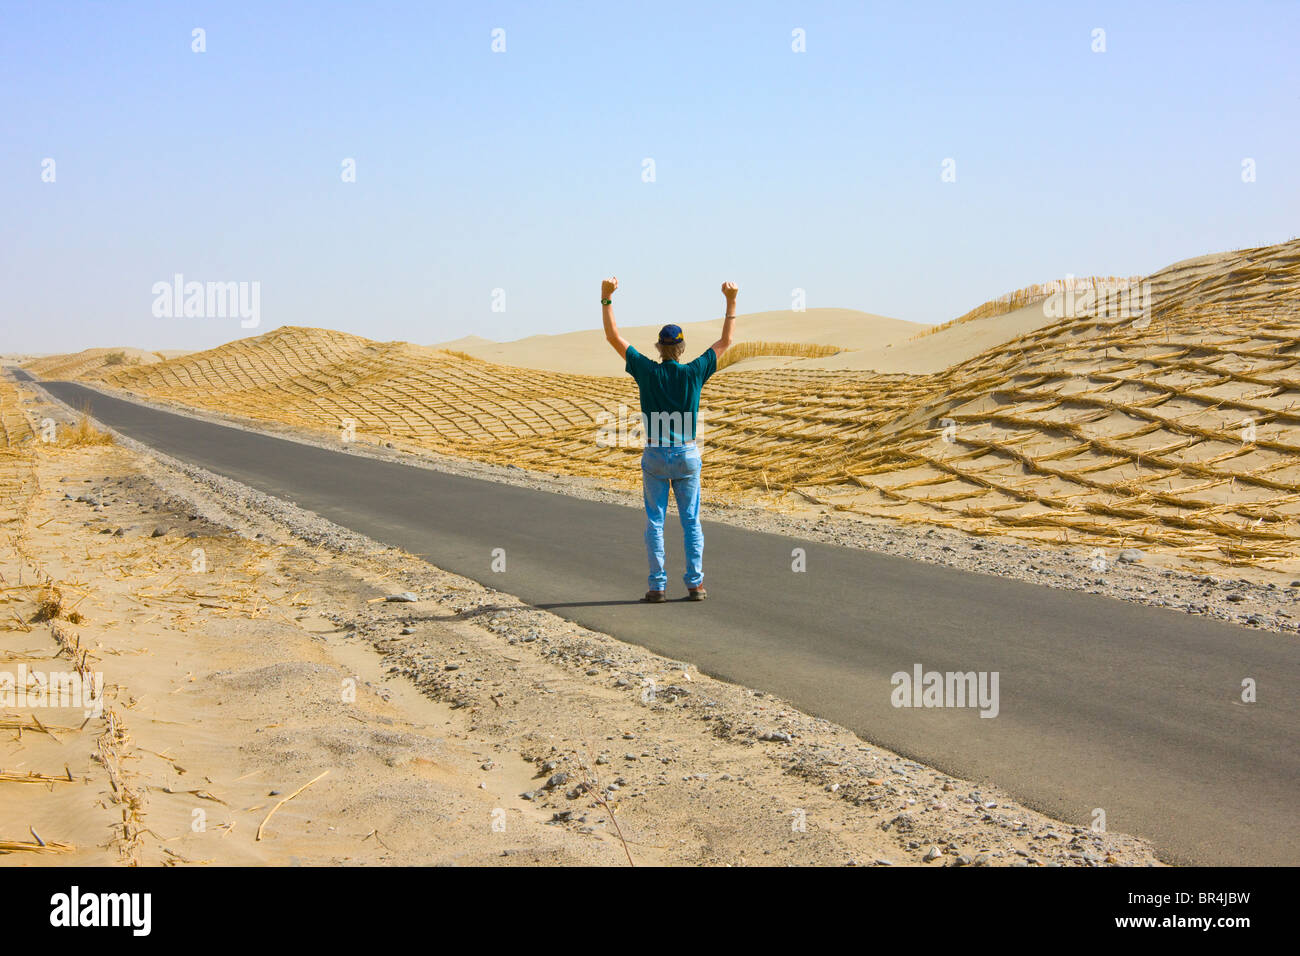 Western tourist on the freeway, reed made fence holding sand to prevent desertification along the freeway, Aksu, Xinjiang, China Stock Photo